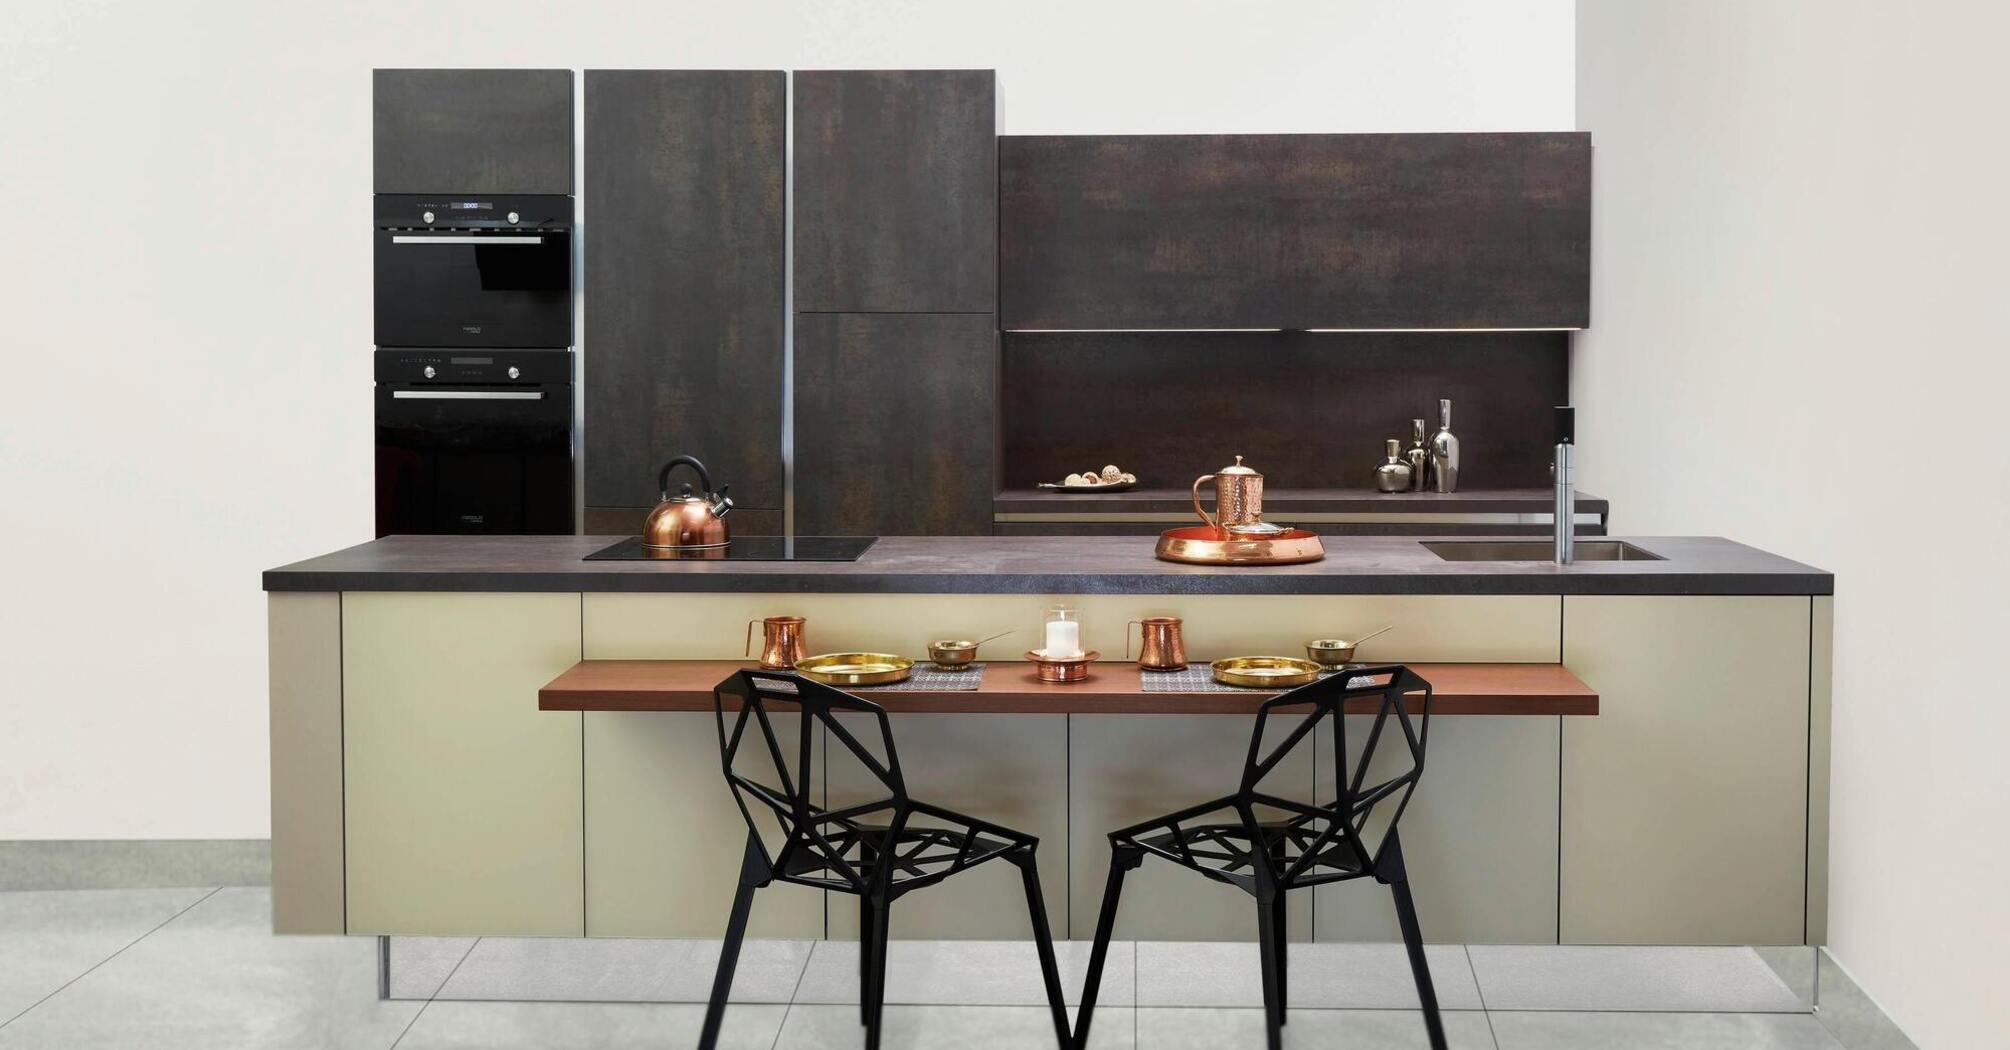 Pros and cons of dark kitchen furniture